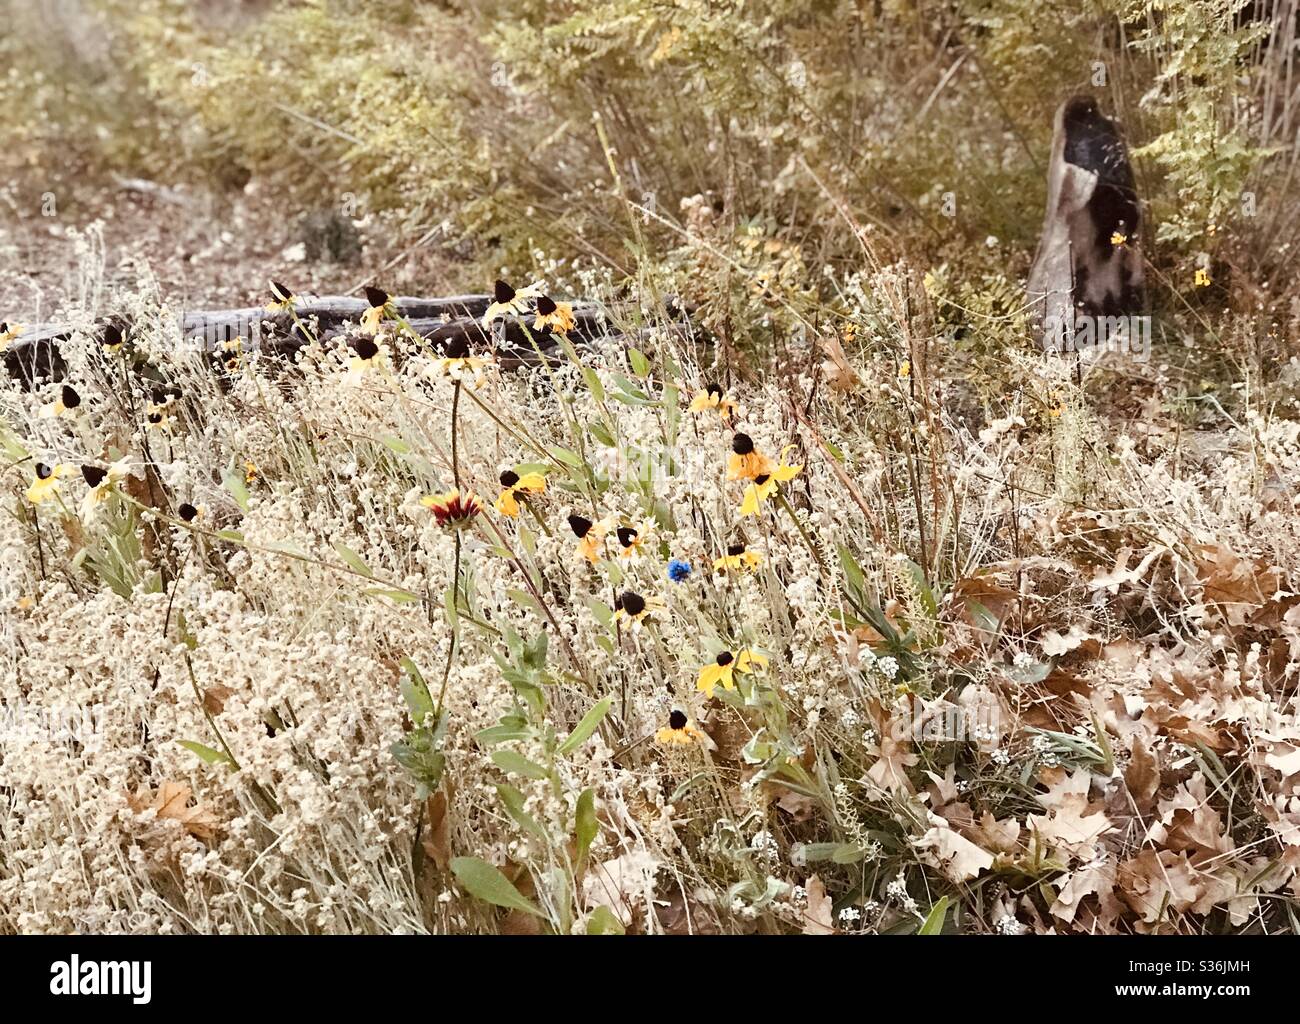 Daisies and blue wildflowers stand out in the dry brush and dead leaves in the ground. Stock Photo